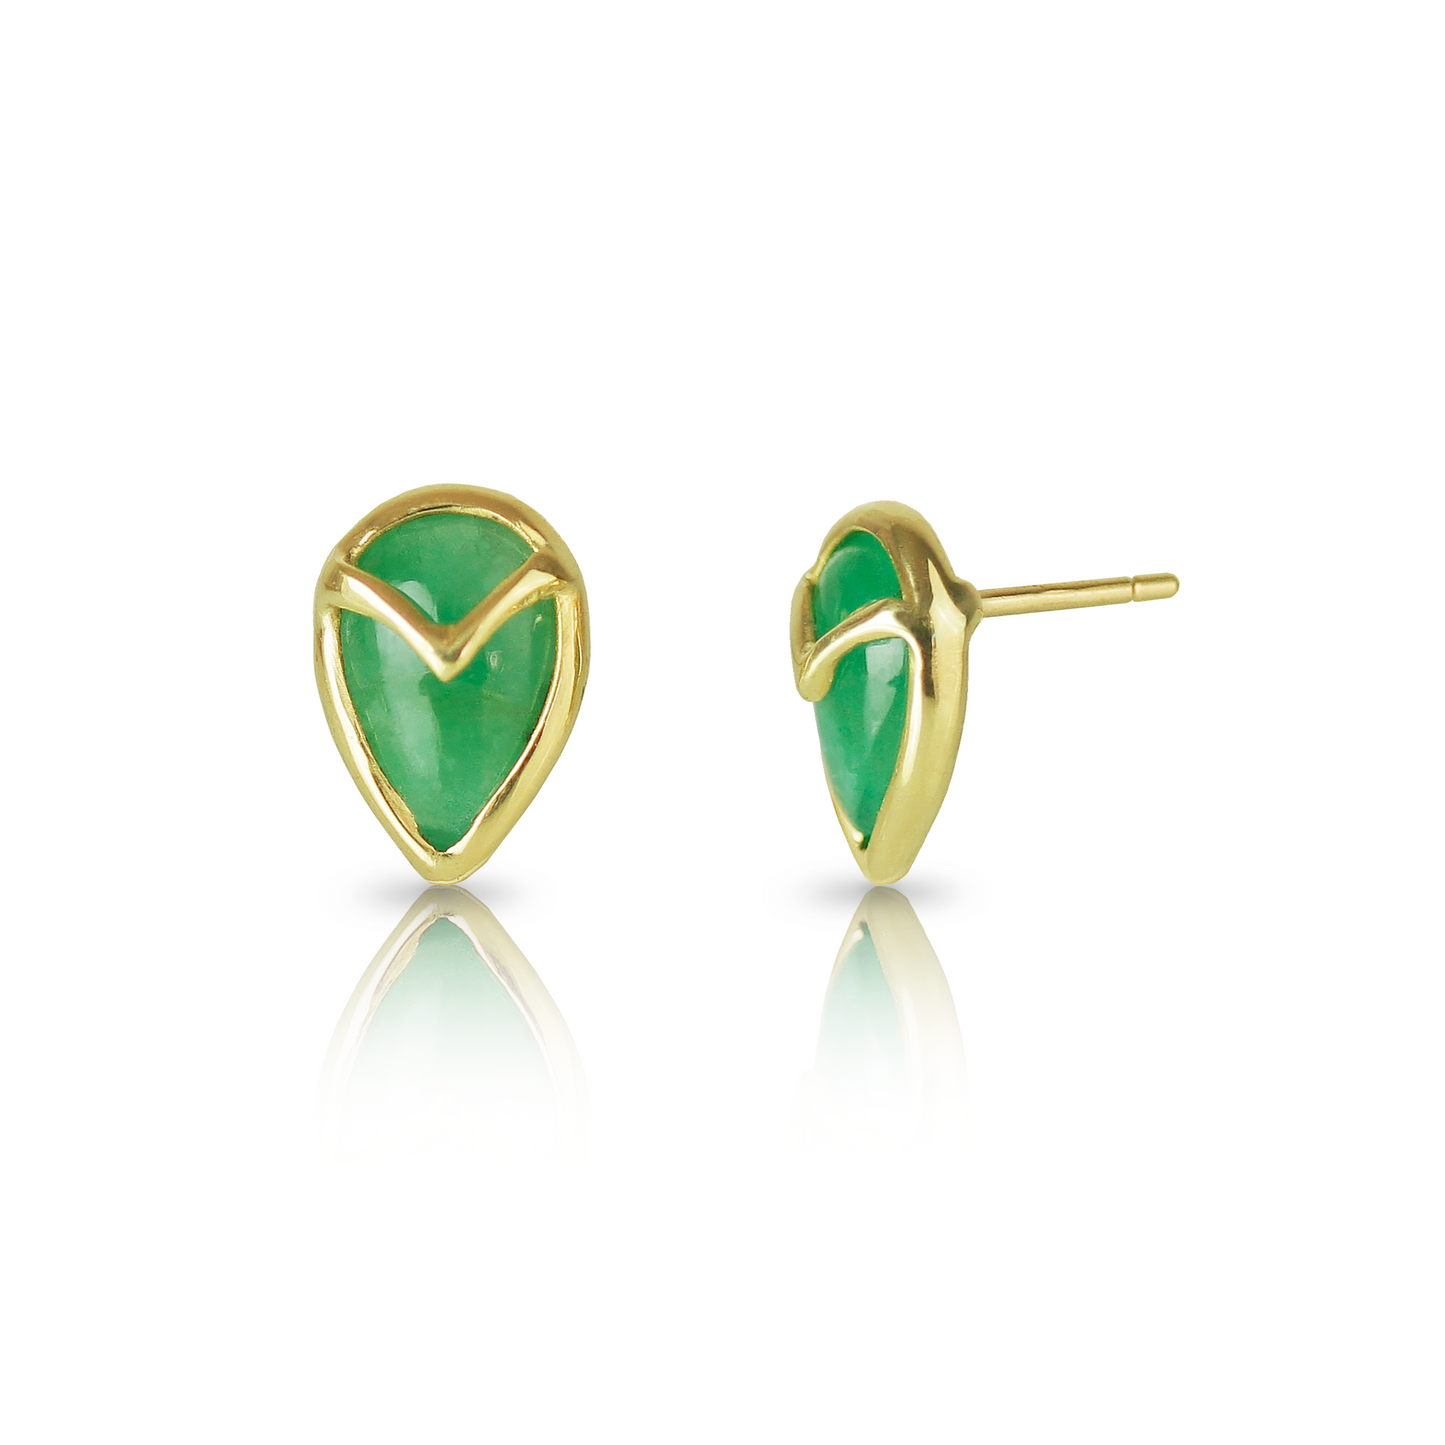 A pair of stud earrings with teardrop-shaped, green emerald stone, bezel set with yellow gold owl beak detail